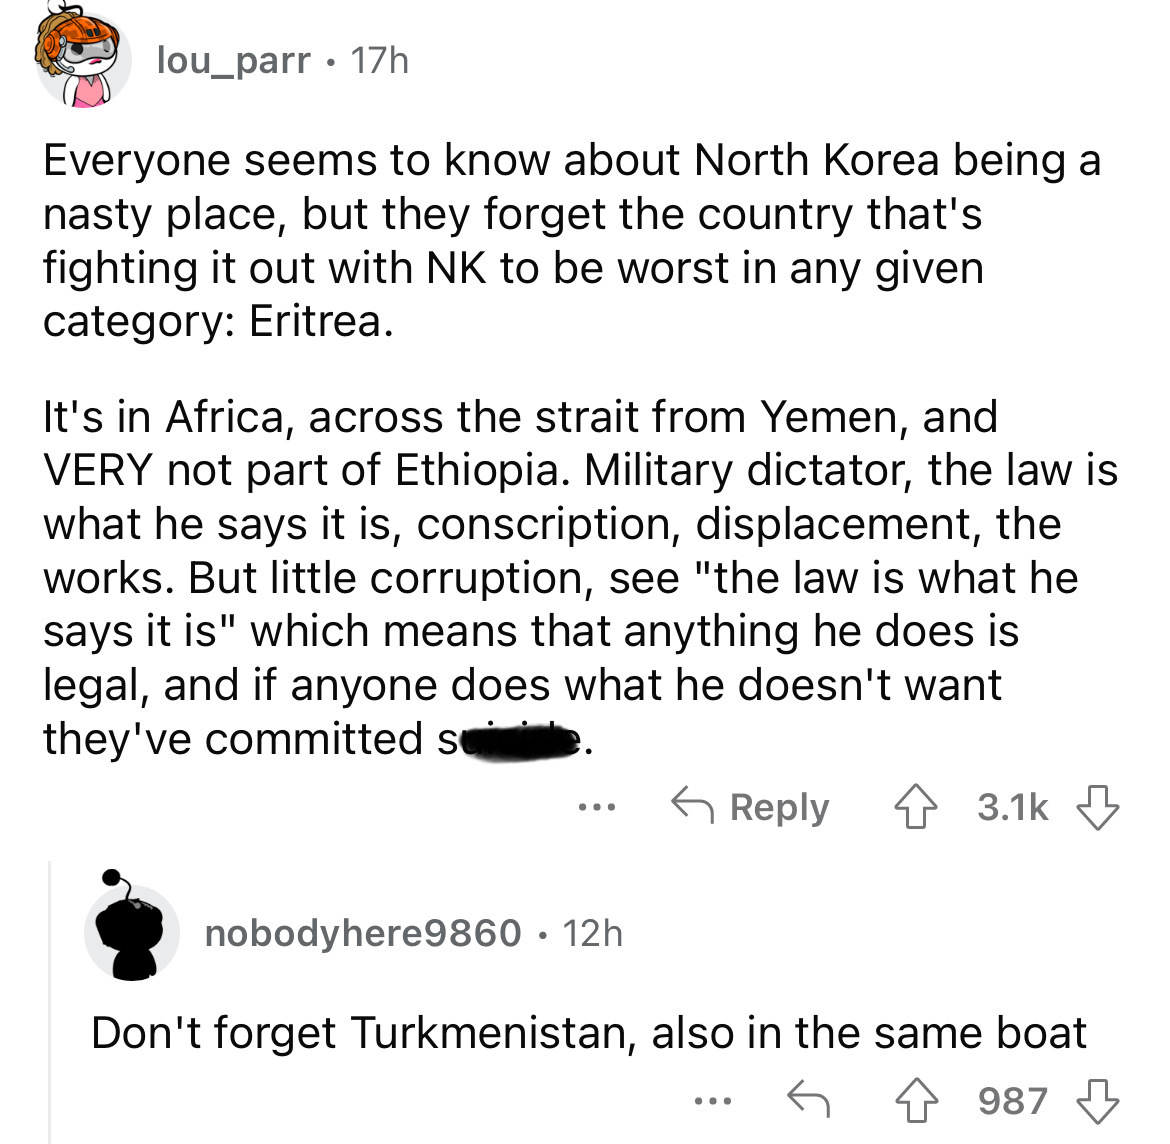 angle - lou_parr 17h Everyone seems to know about North Korea being a nasty place, but they forget the country that's fighting it out with Nk to be worst in any given category Eritrea. It's in Africa, across the strait from Yemen, and Very not part of Eth